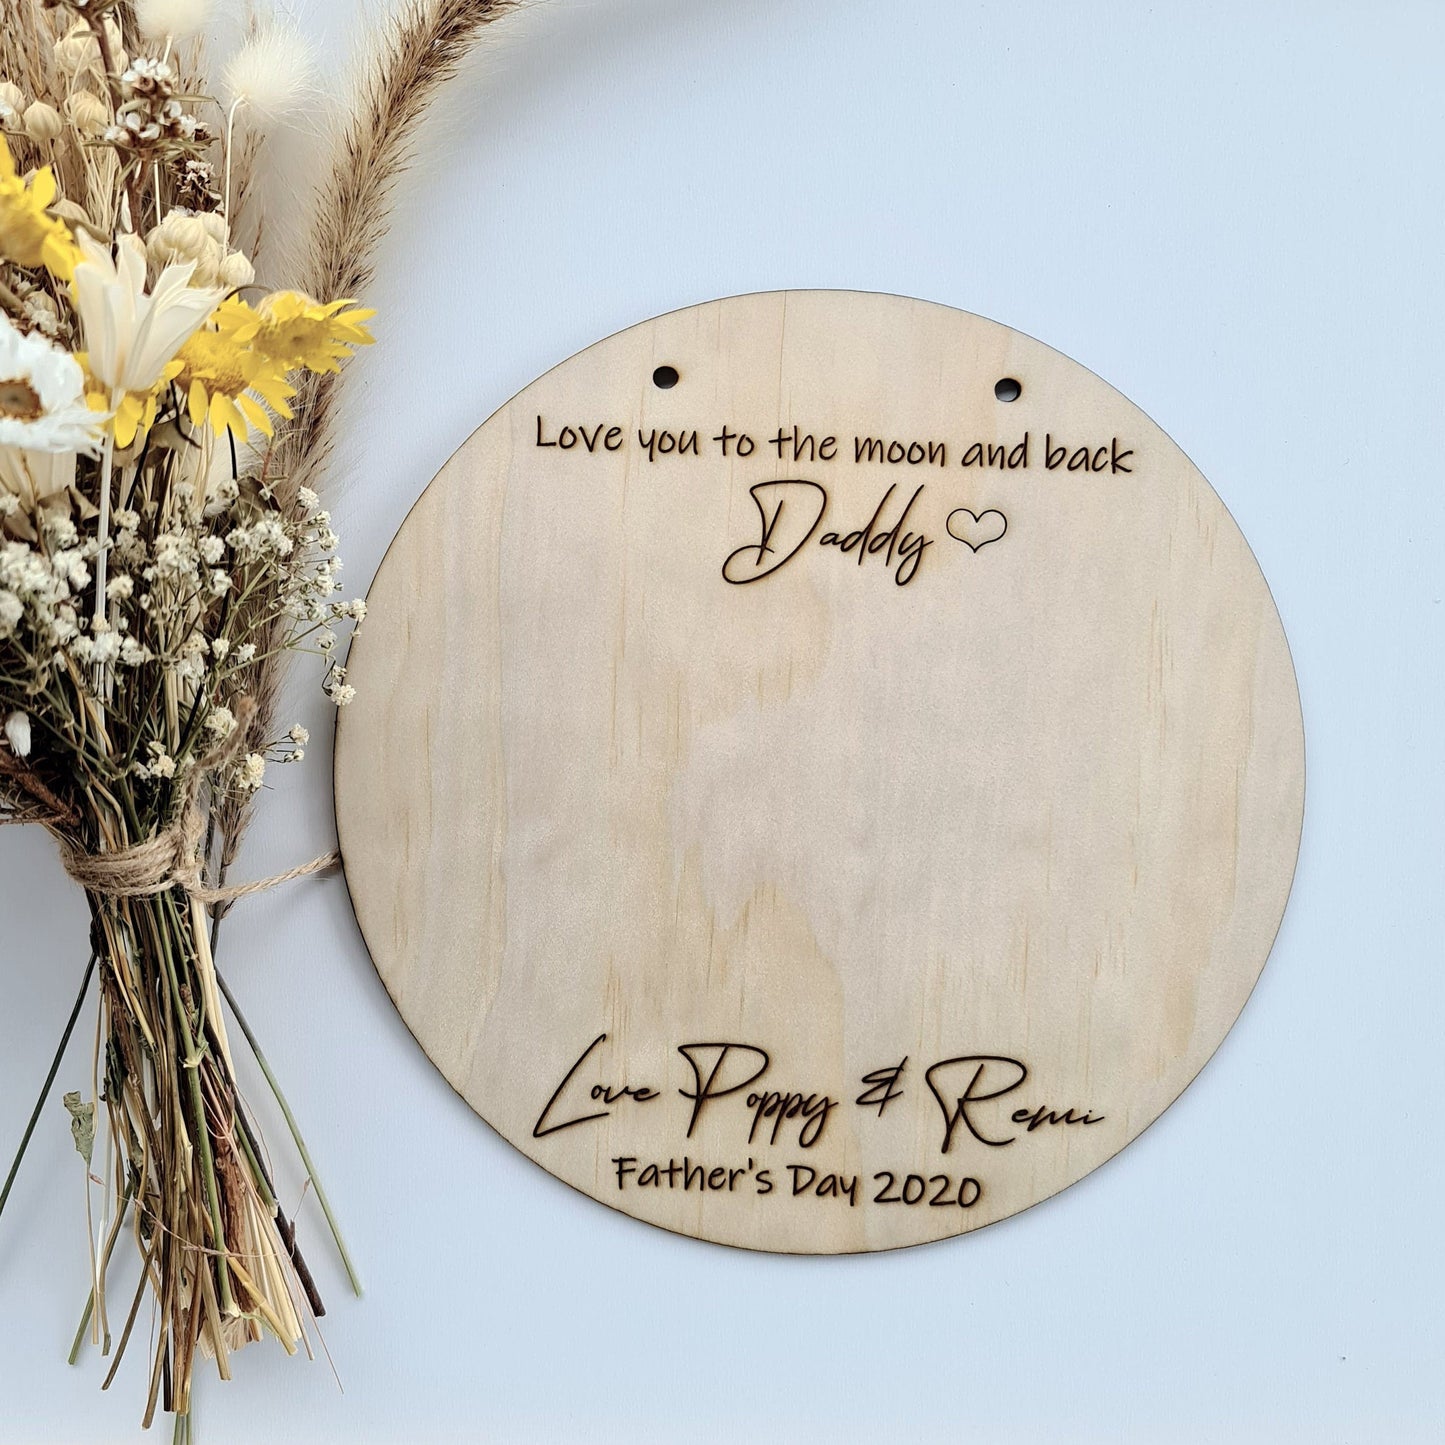 Qty 2 Father's Day Plaques ◽ Wall Hanging ◽ Dad's Day ◽ Dad ◽ Daddy ◽ Daddy's Day ◽ Grandpa ◽ Grandad